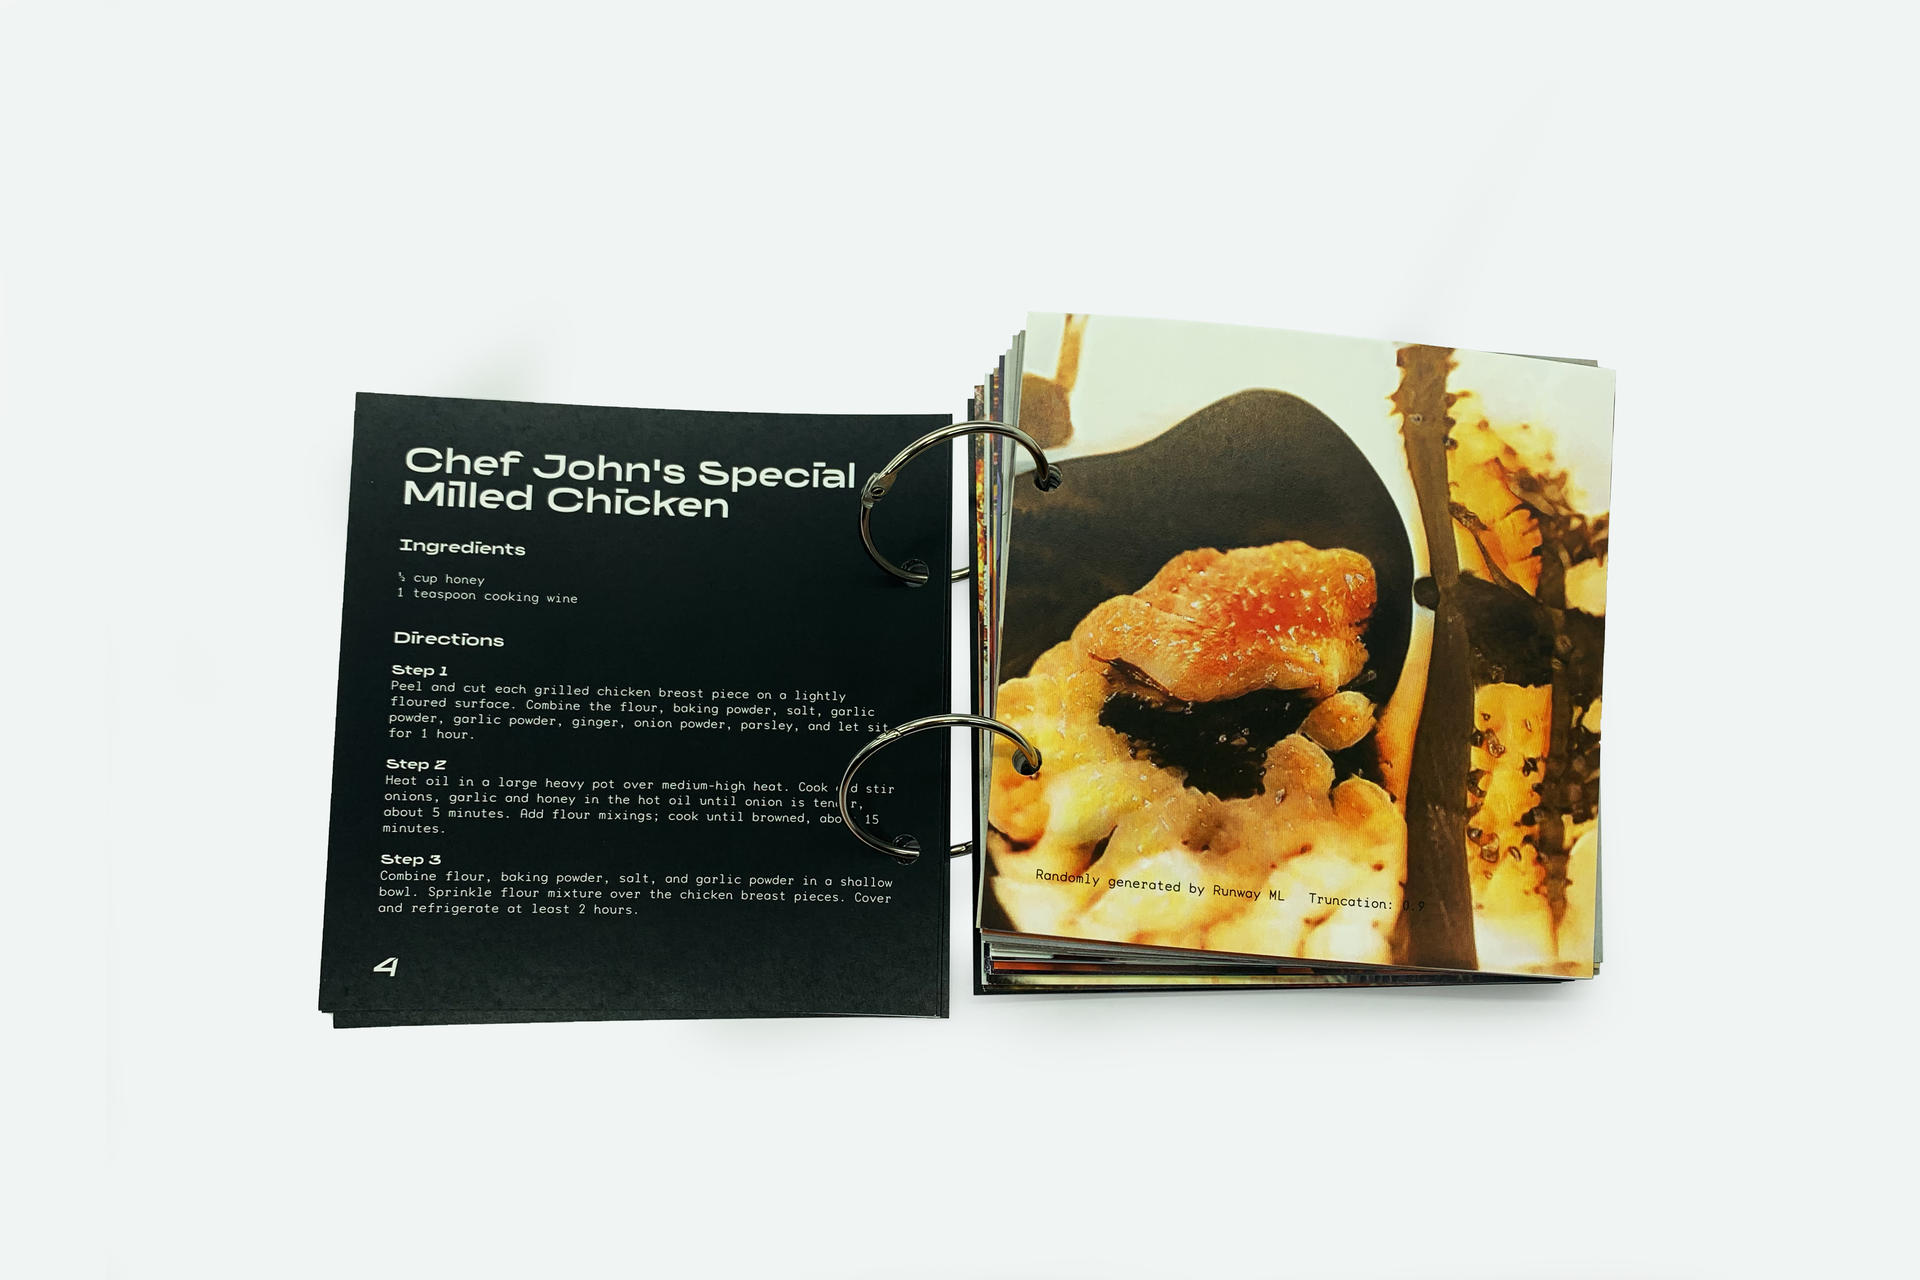 A spread of the book, showing the recipe and food image that were both generated by machine learning.